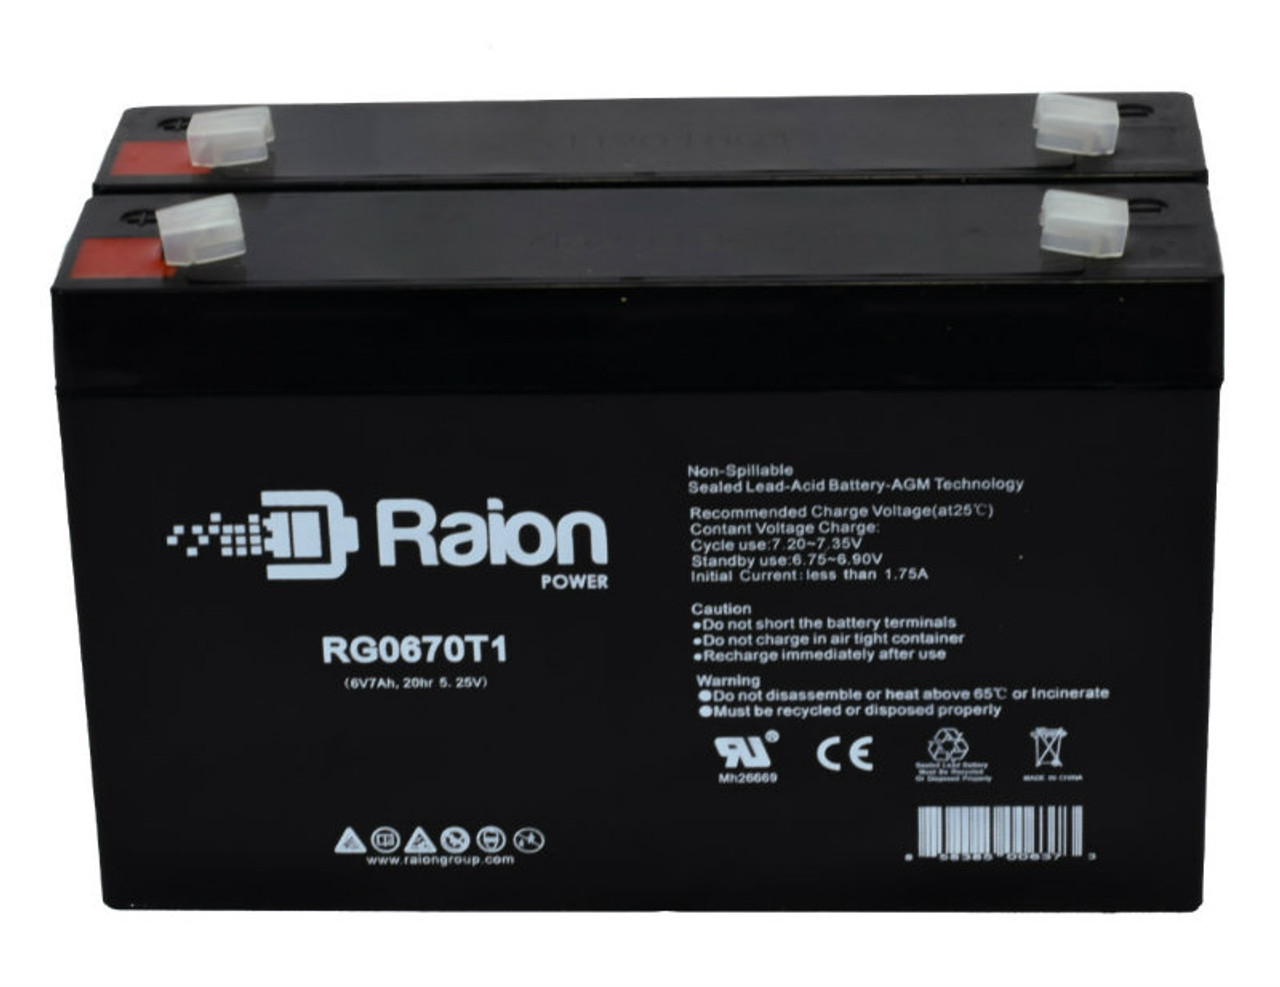 Raion Power RG0670T1 6V 7Ah Replacement Emergency Light Battery for Sure-Lites AA2 - 2 Pack